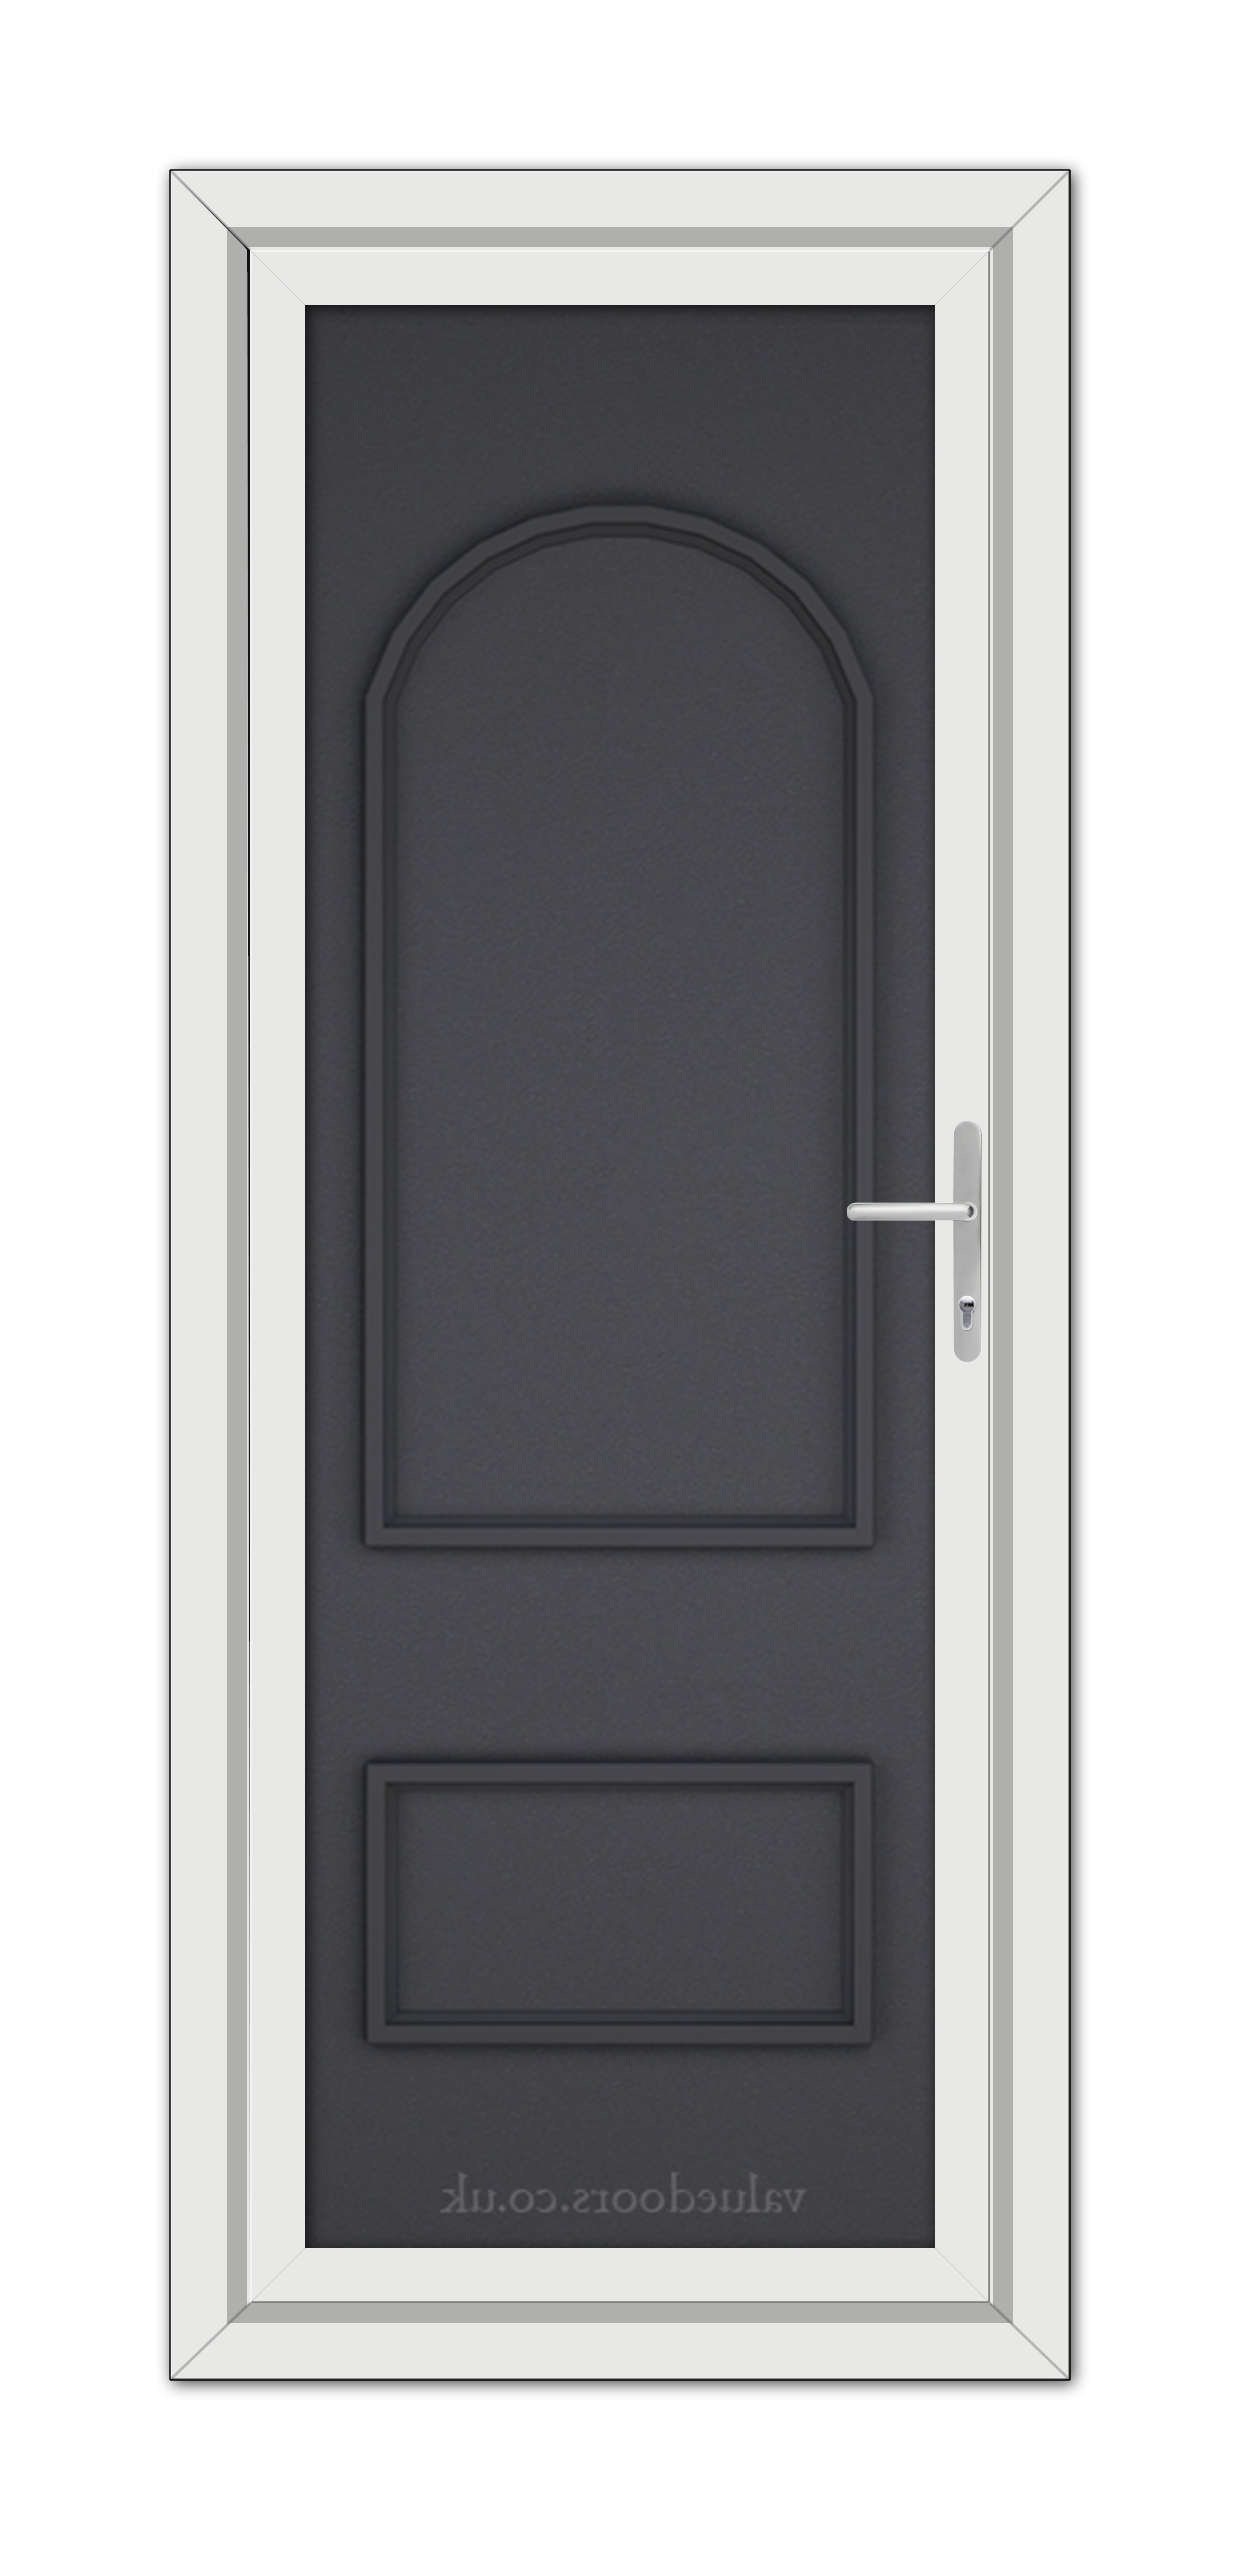 A vertical image of a Grey Grained Rockingham Solid uPVC Door with a white frame and a silver handle, viewed from the front.